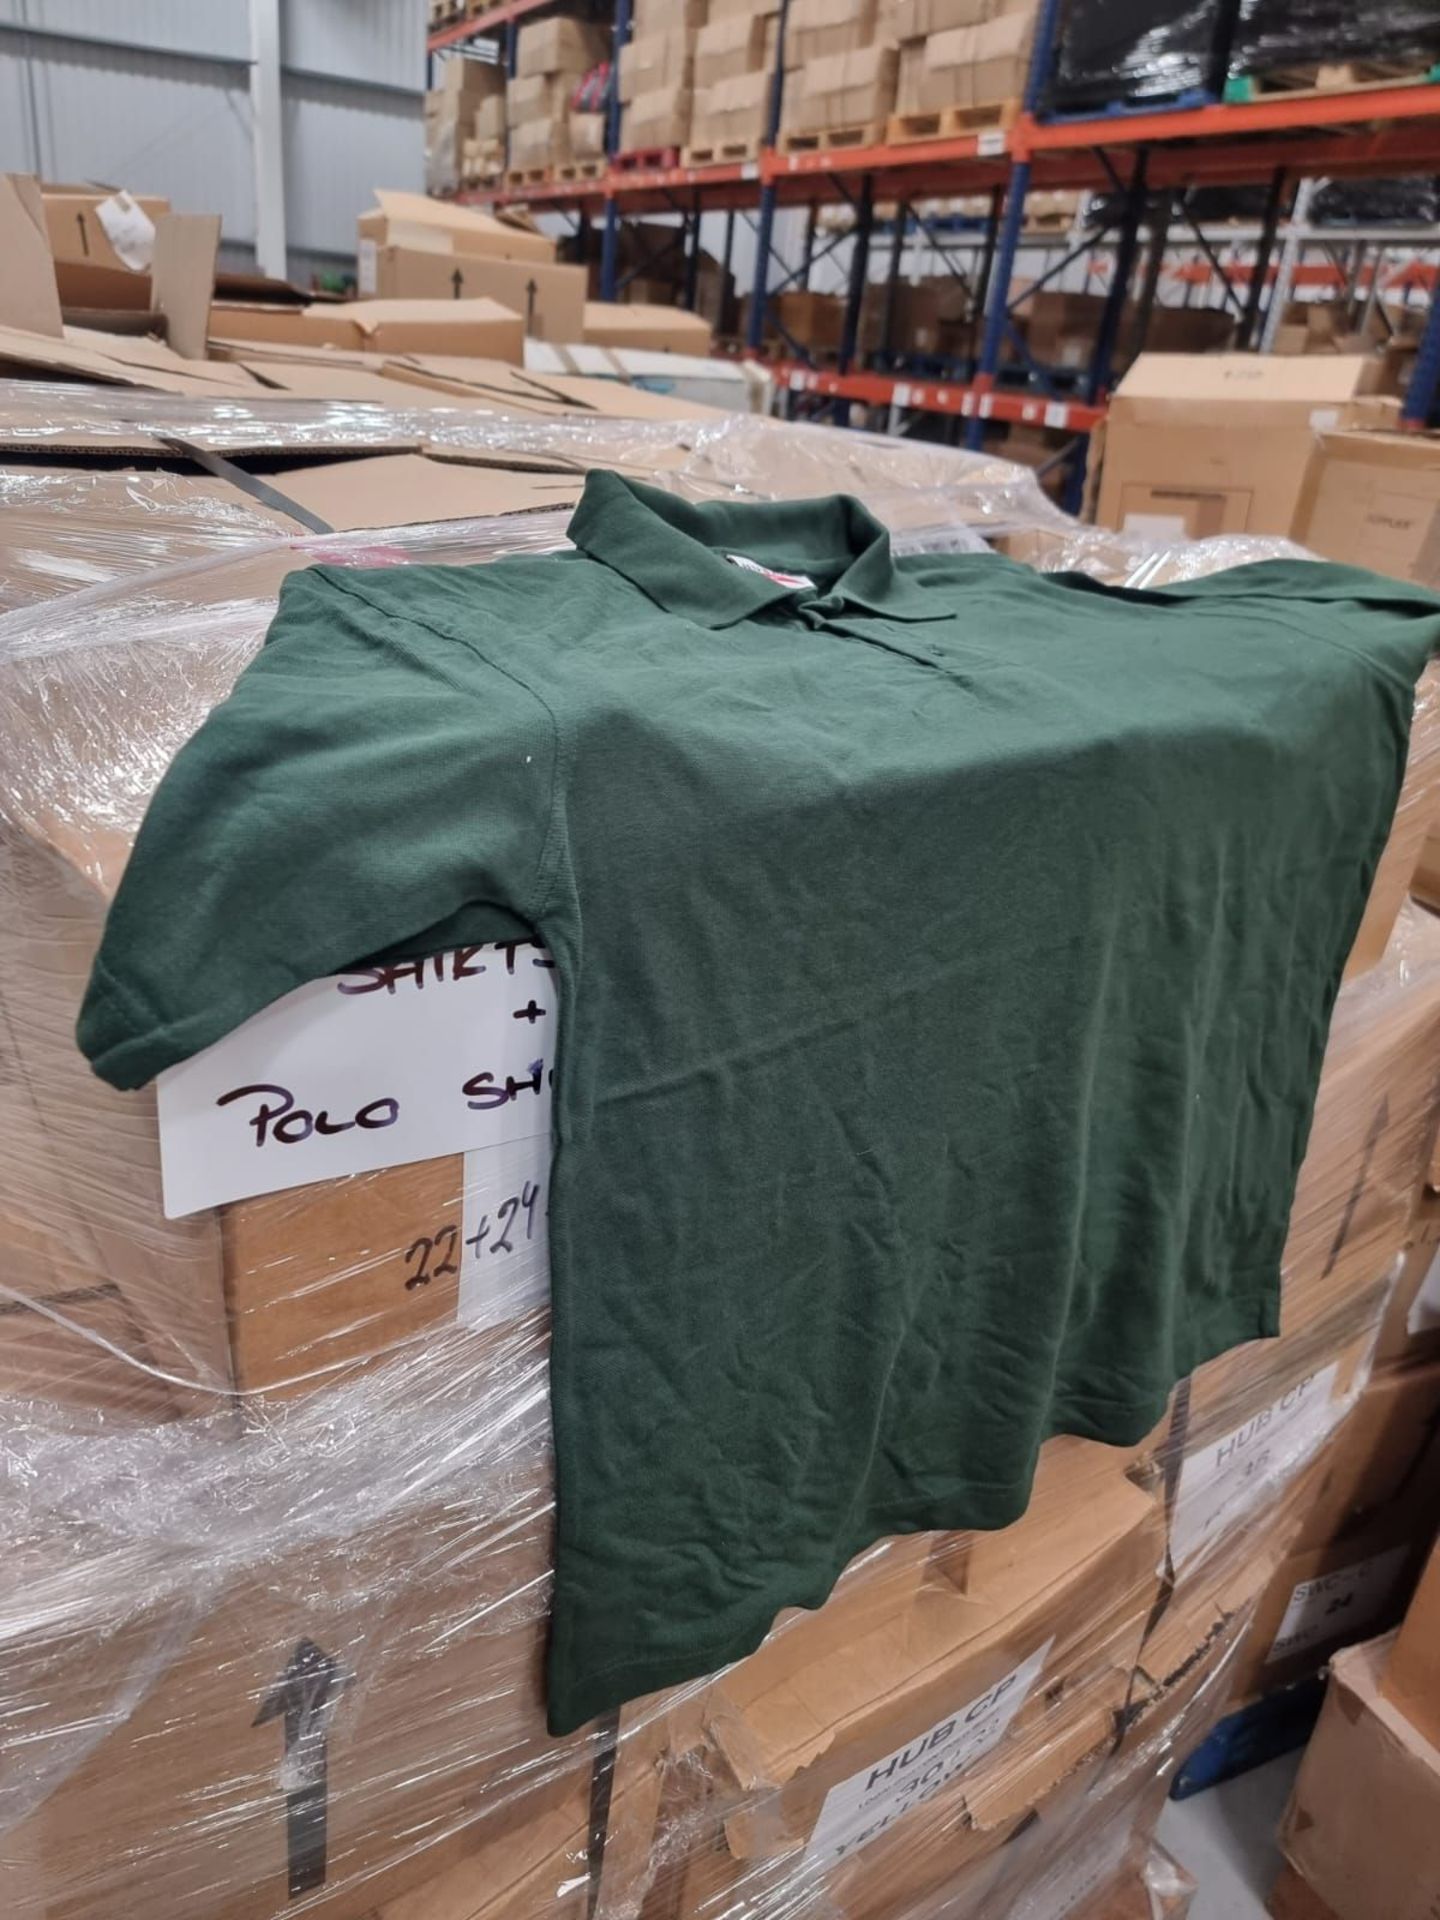 PALLET TO CONTAIN A LARGE QUANTITY OF NEW CLOTHING GOODS. MAY INCLUDE ITEMS SUCH AS: T-SHIRTS, - Image 9 of 28